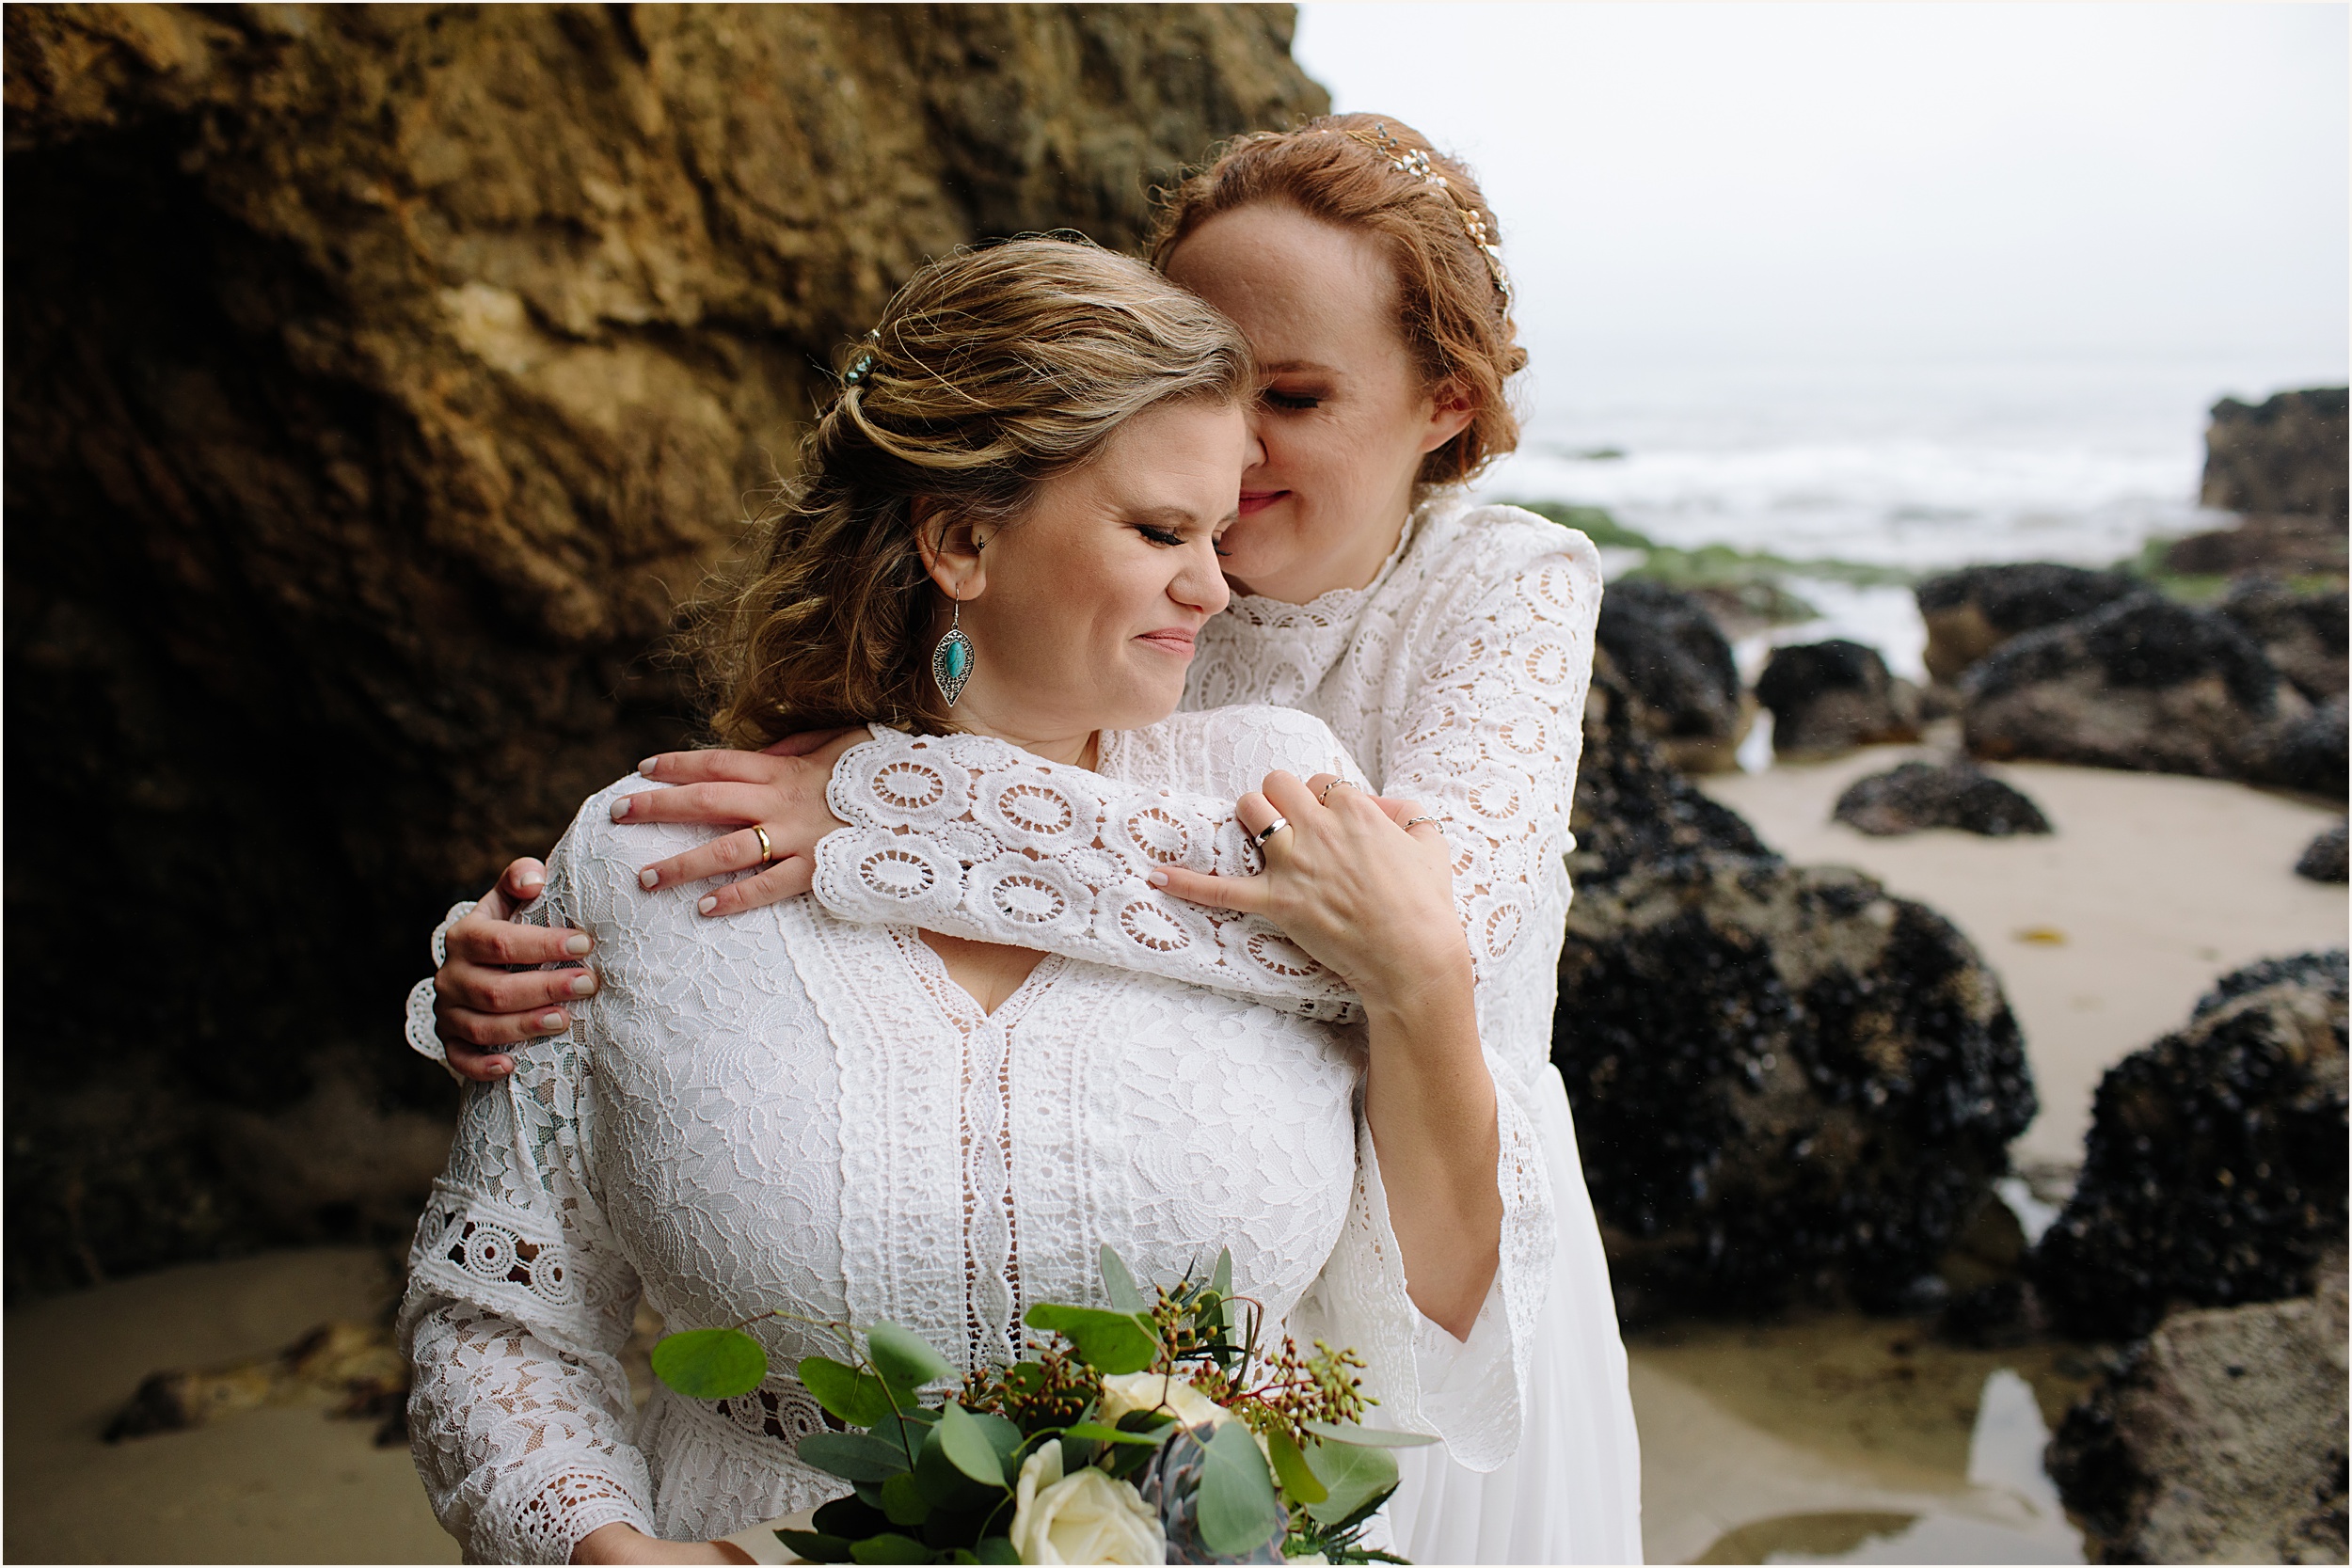 Photo of brides in stunning white lace elopement dresses at El Matador beach cave